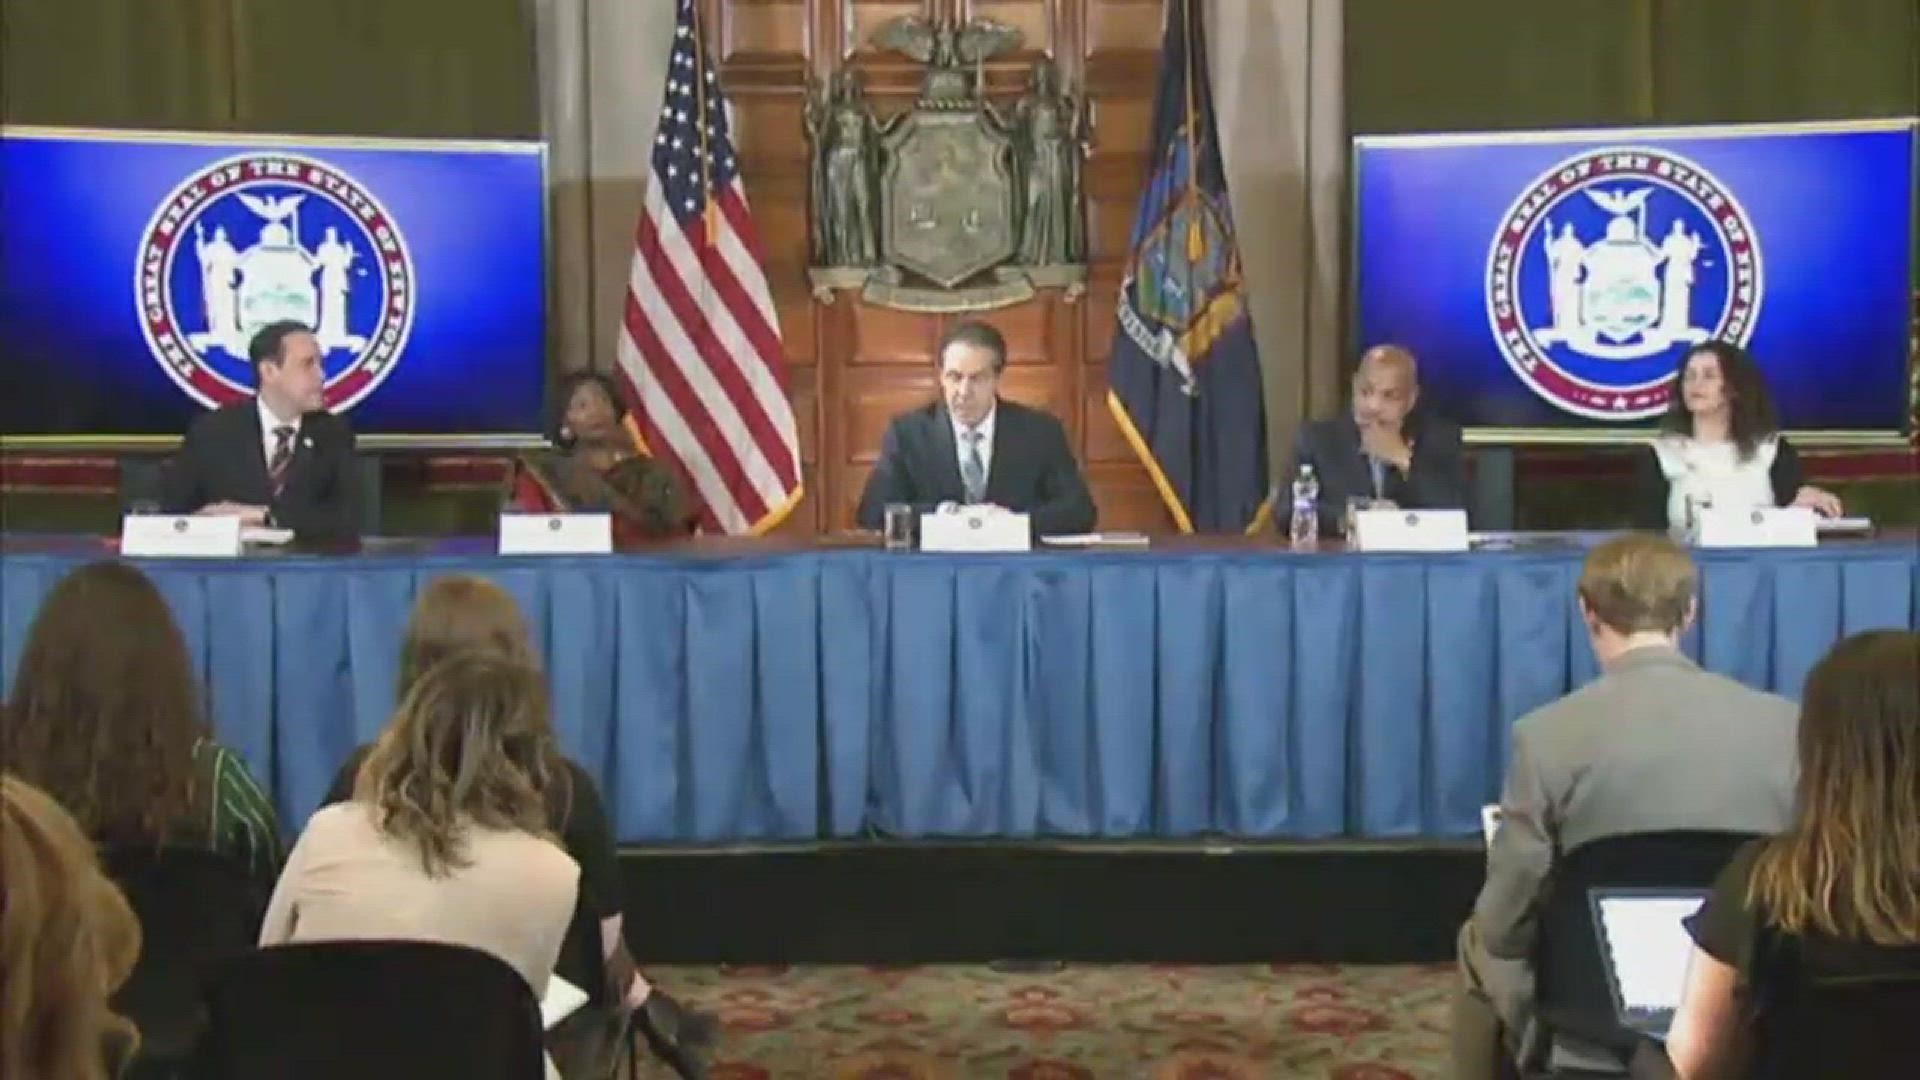 Gov. Cuomo confirms 2nd case of coronavirus in NYS; 2 Buffalo families being tested.  The families recently traveled to Italy and are currently isolated at home.